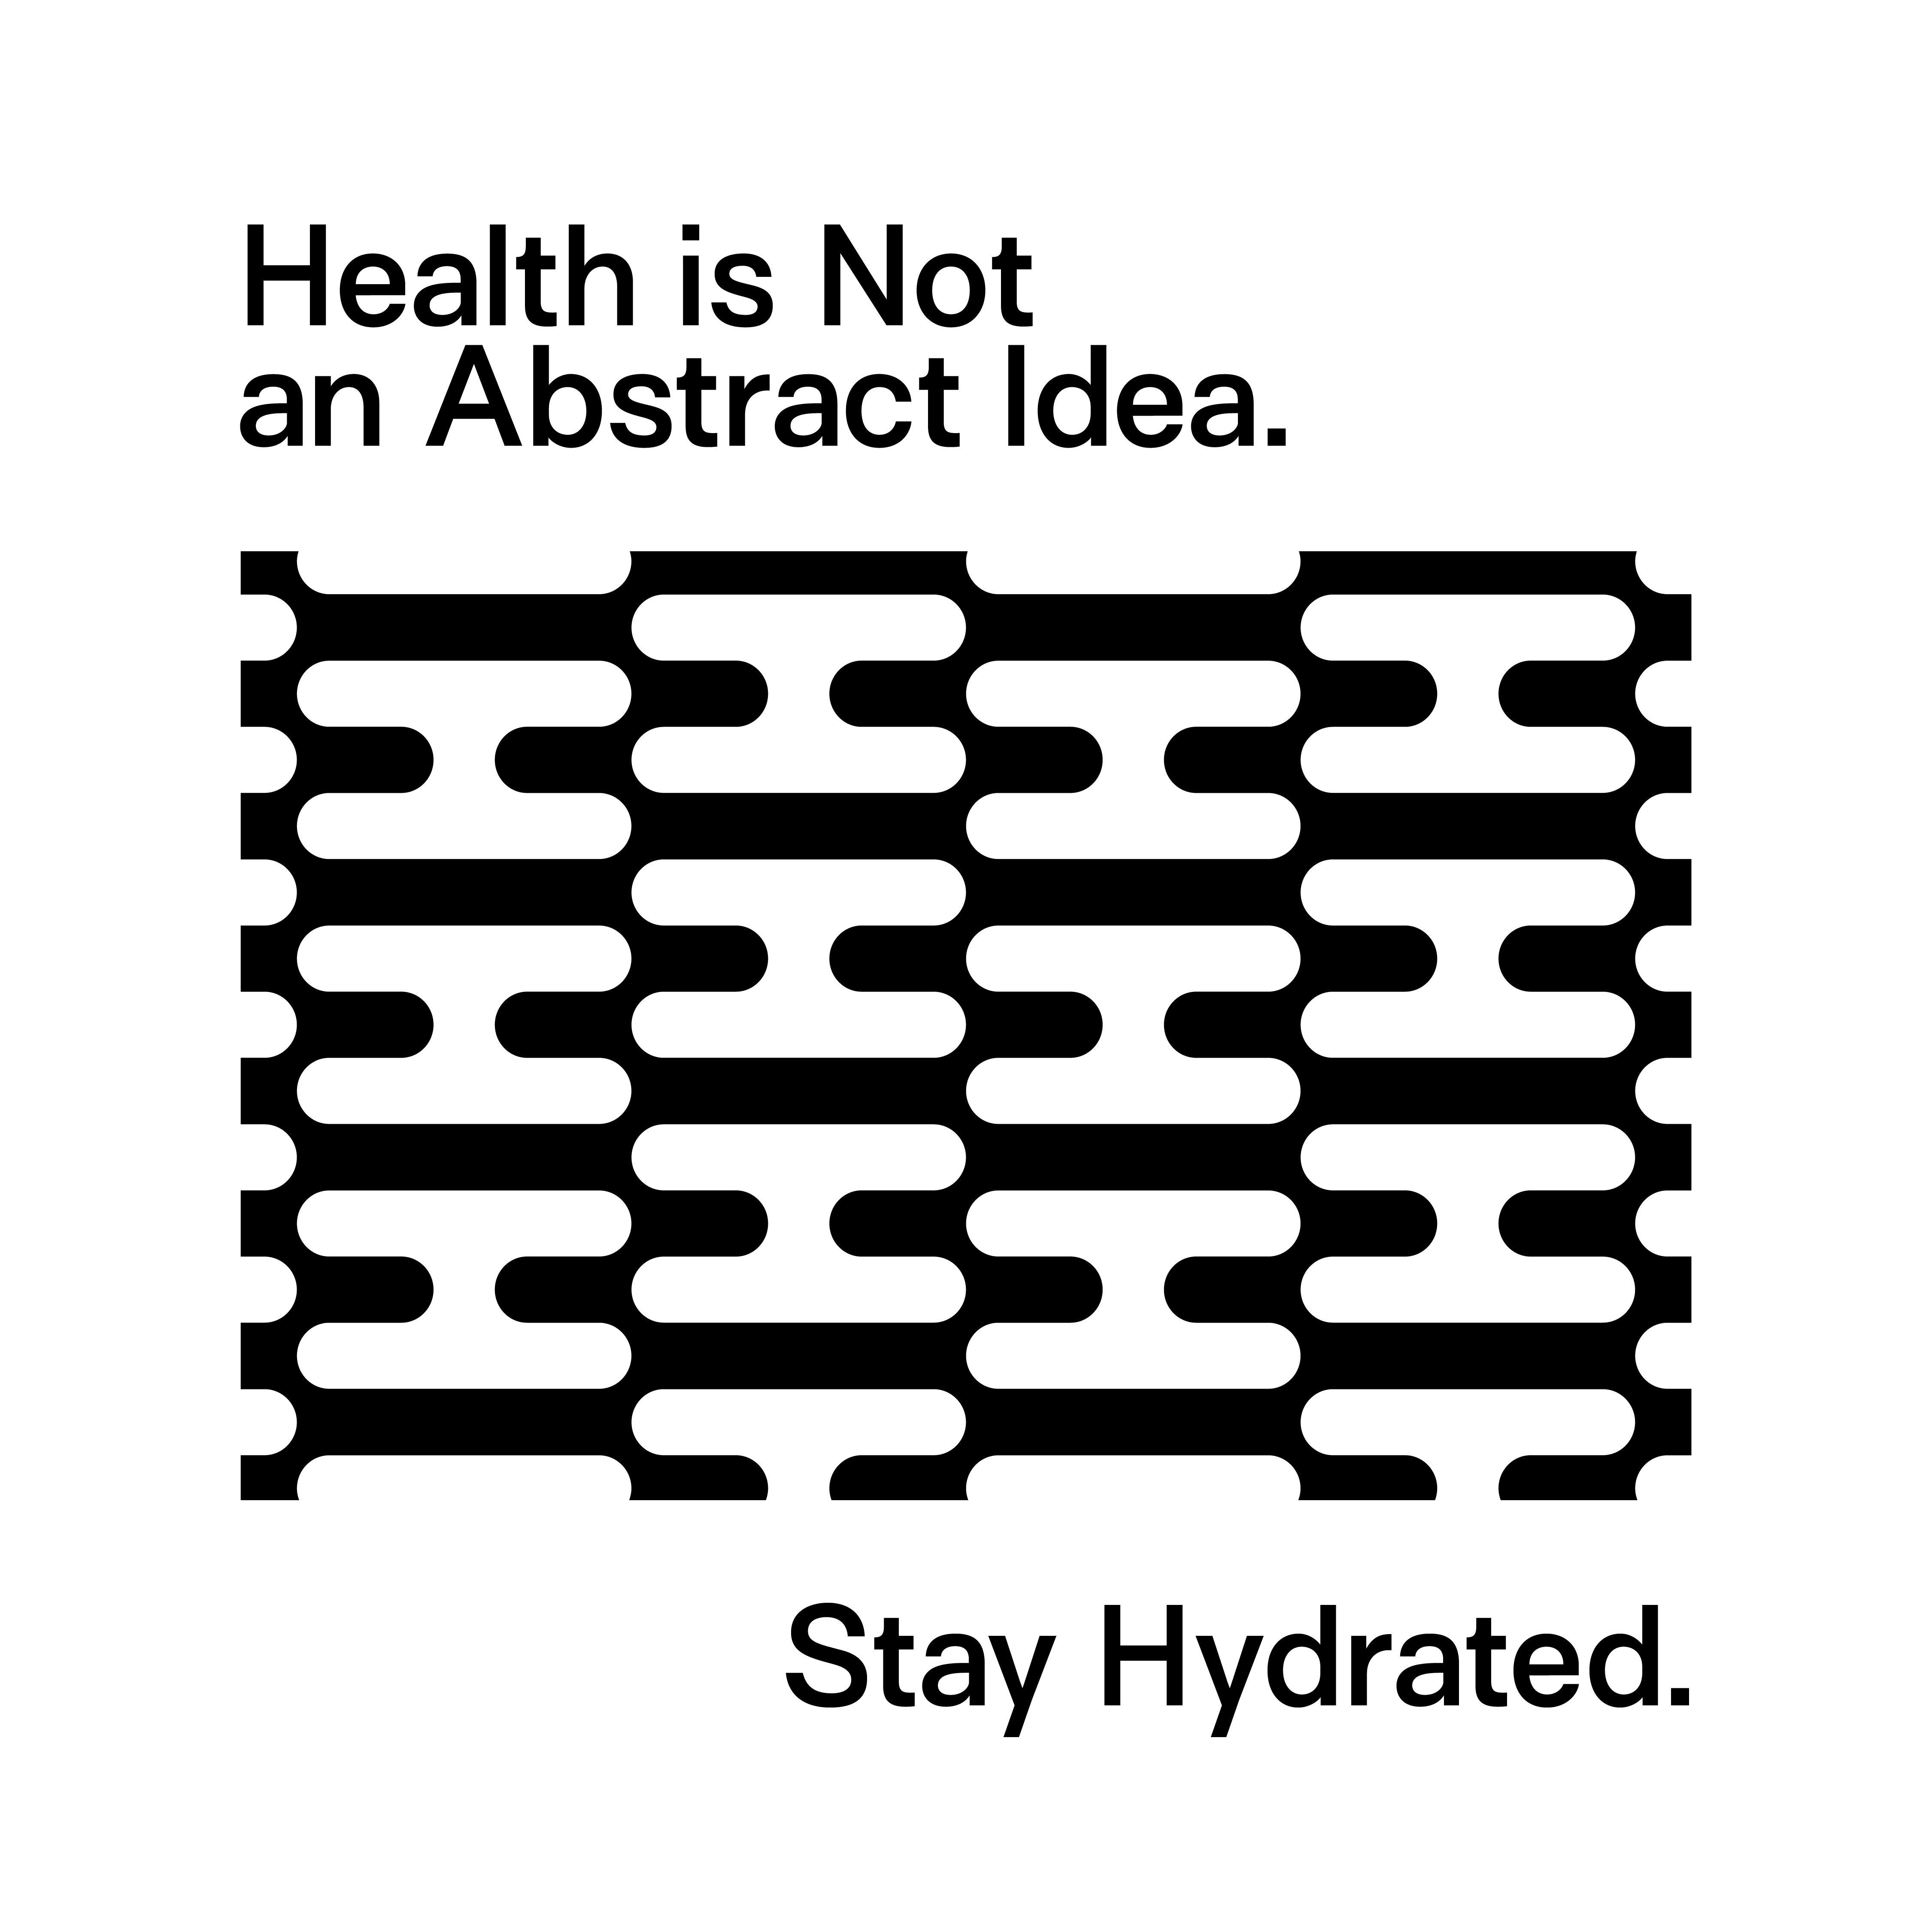 "Health is Not an Abstract Idea" by Jared Maire